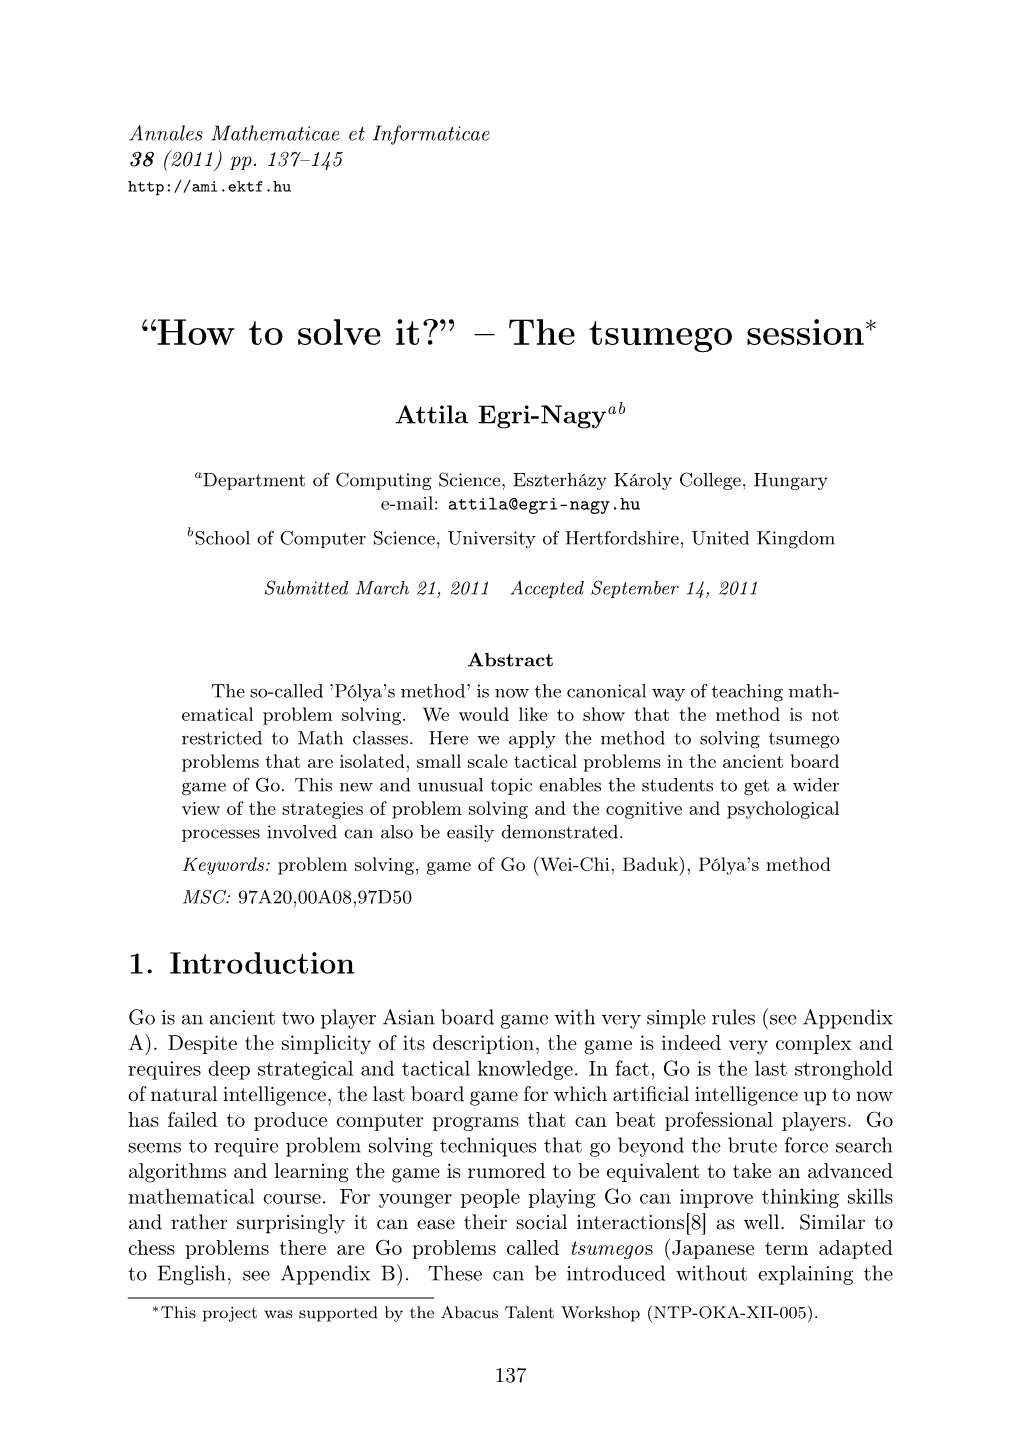 “How to Solve It?” – the Tsumego Session∗